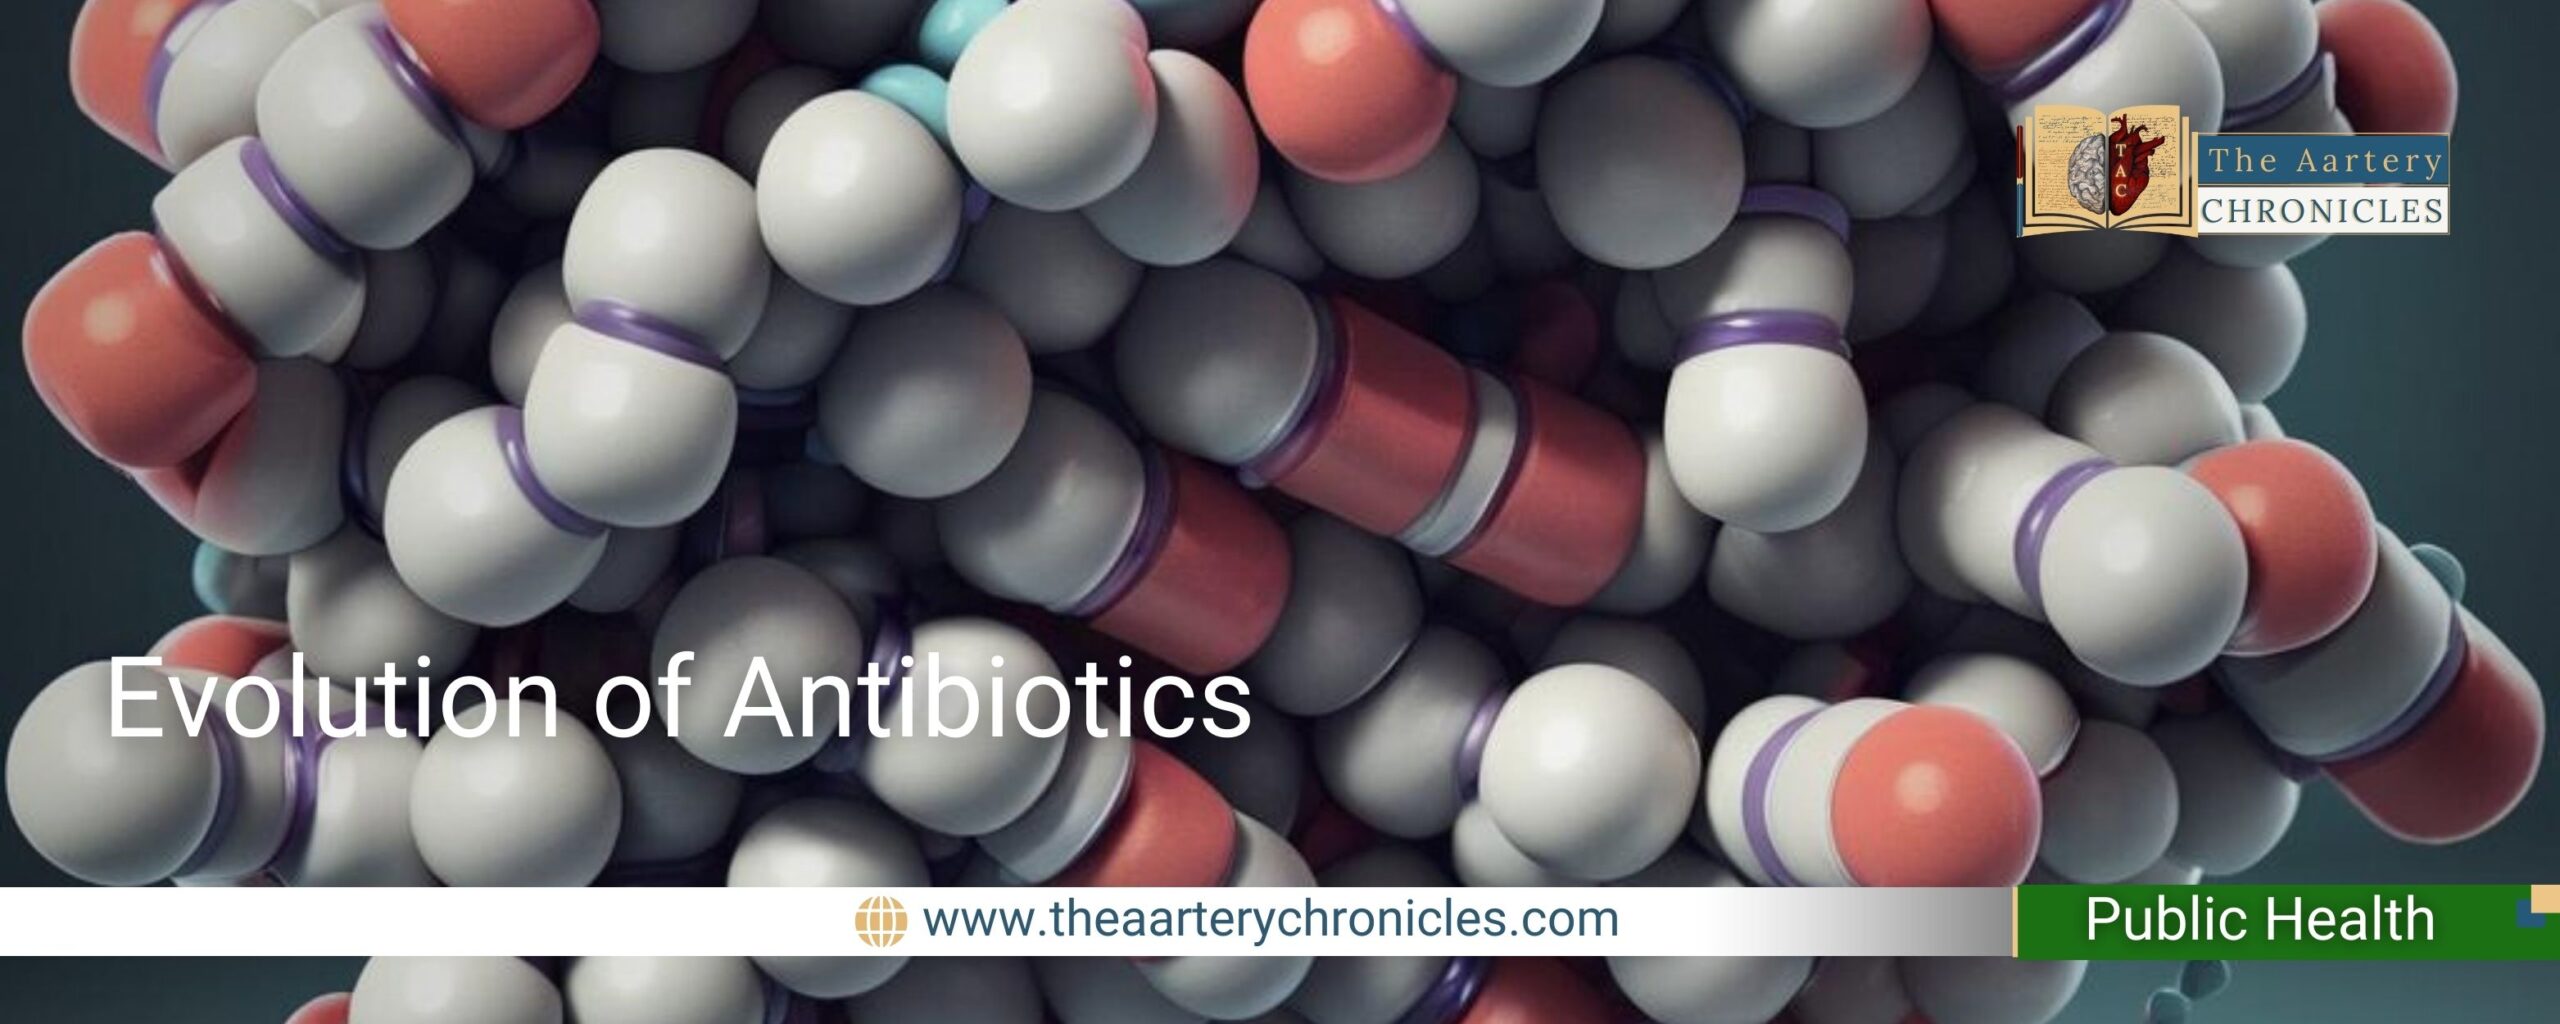 evolution-of-antibiotics-the-aartery-chronicles-tac